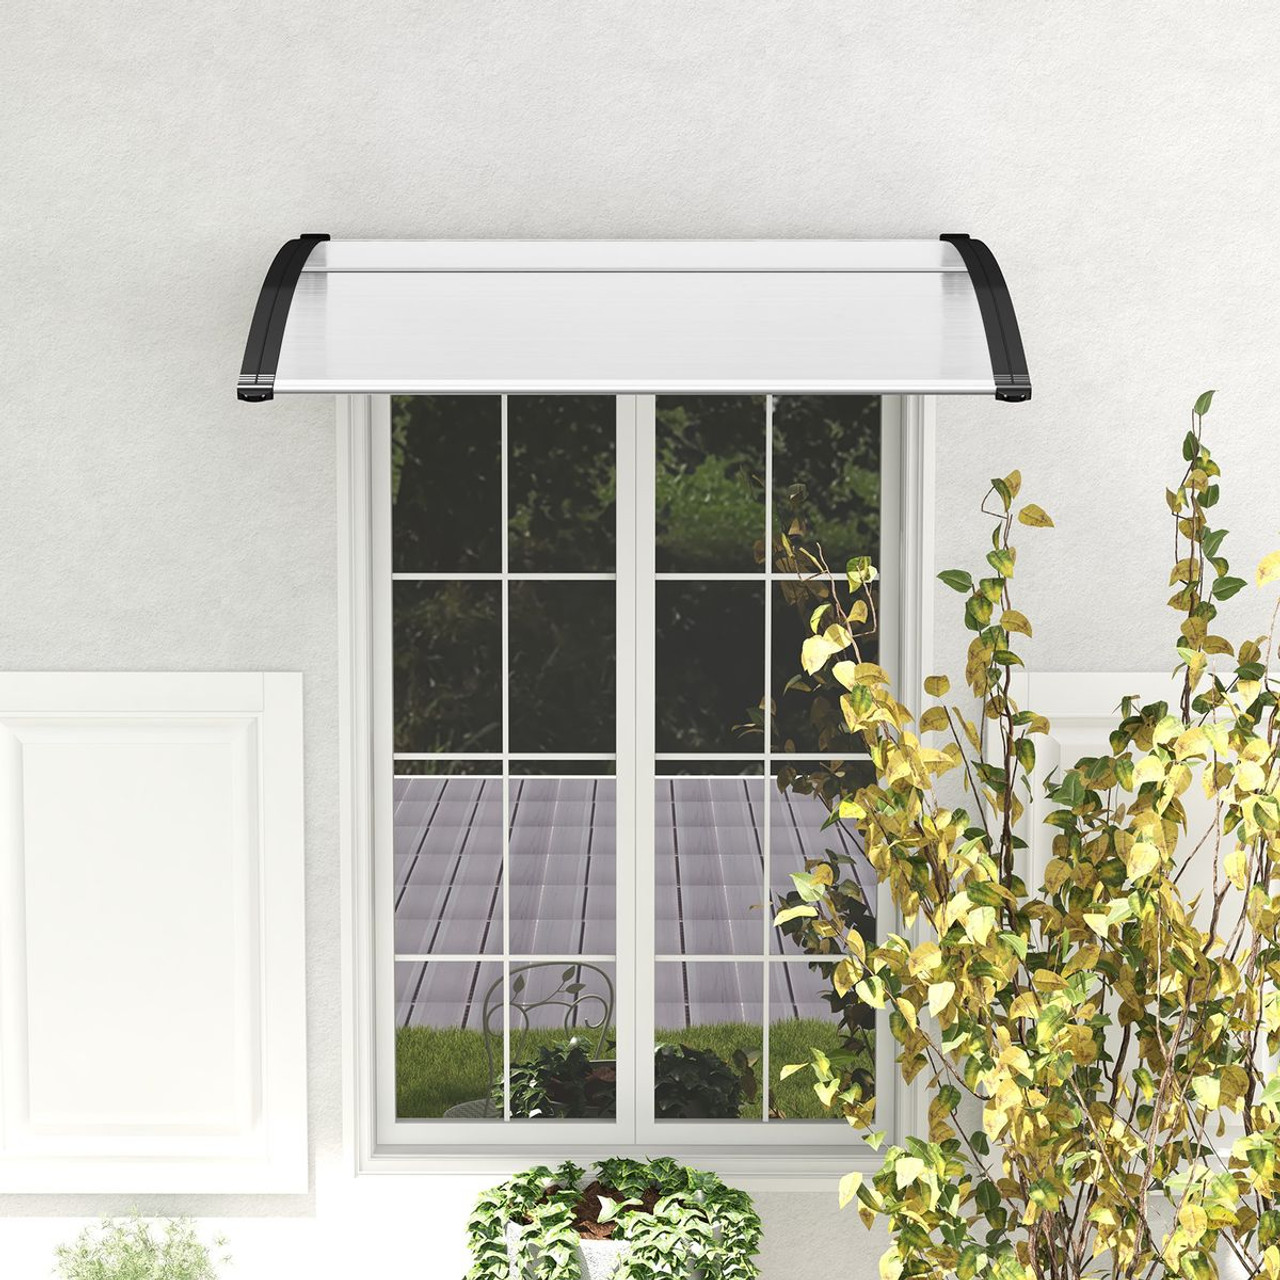 Daily Steals - Deals on Outdoor Front Door/Window Awning!